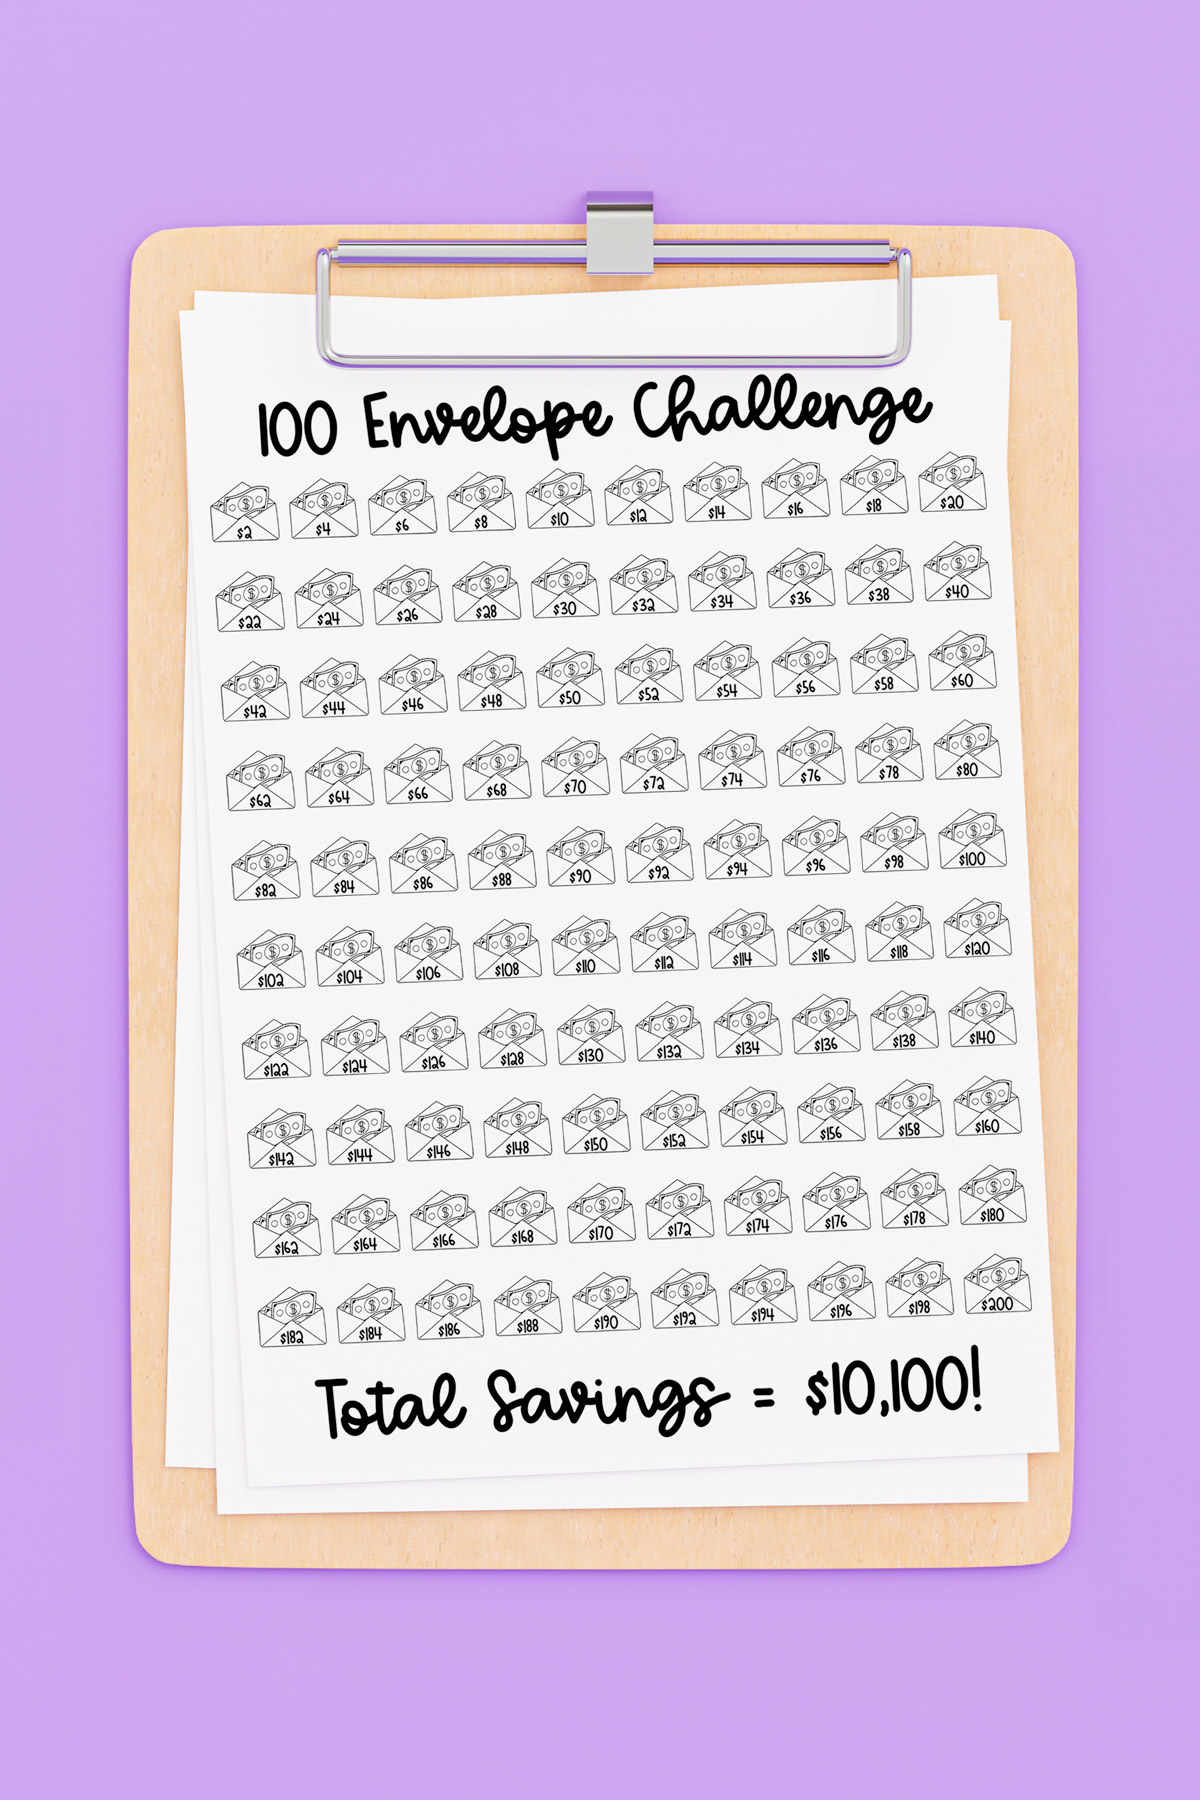 This image is showing an example of a free 100 envelope challenge chart printable you can get at the end of this post. This one is for saving $10,100.